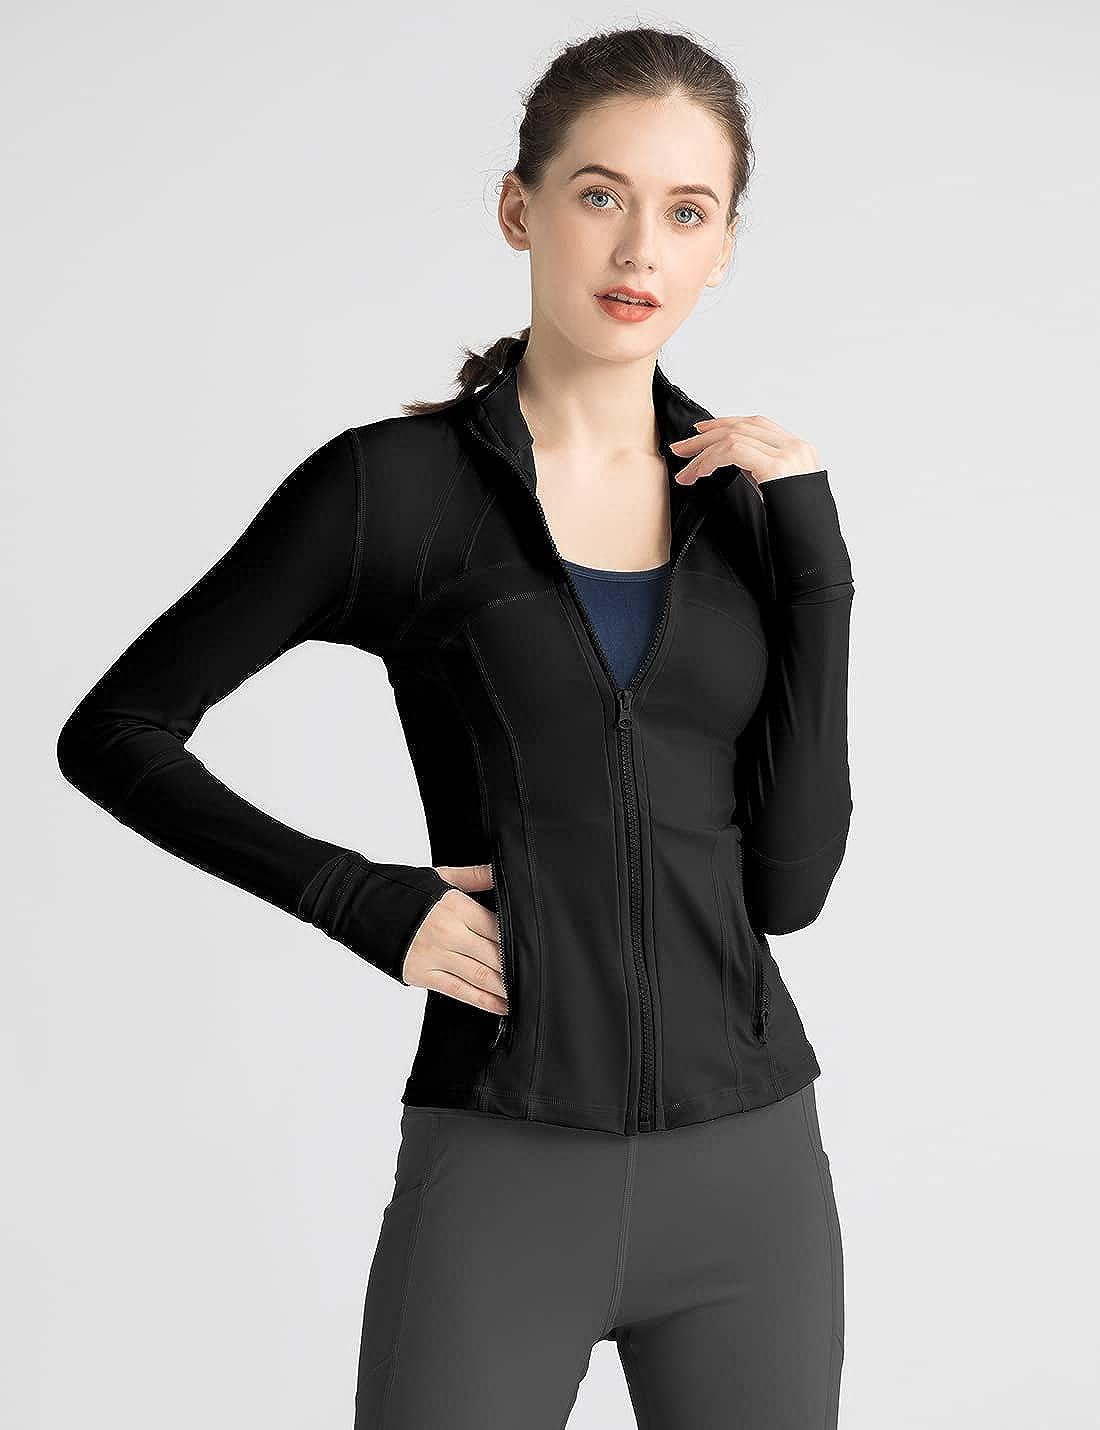 Pchee Bum Workout Lightweight Jacket for Women - Zip Up Top Yoga Jacket,  Athletic Jacket, Full Zip Running Jacket, Sports Jacket, Slim Fit Black  Jacket with Thumb holes for Women (Small) at